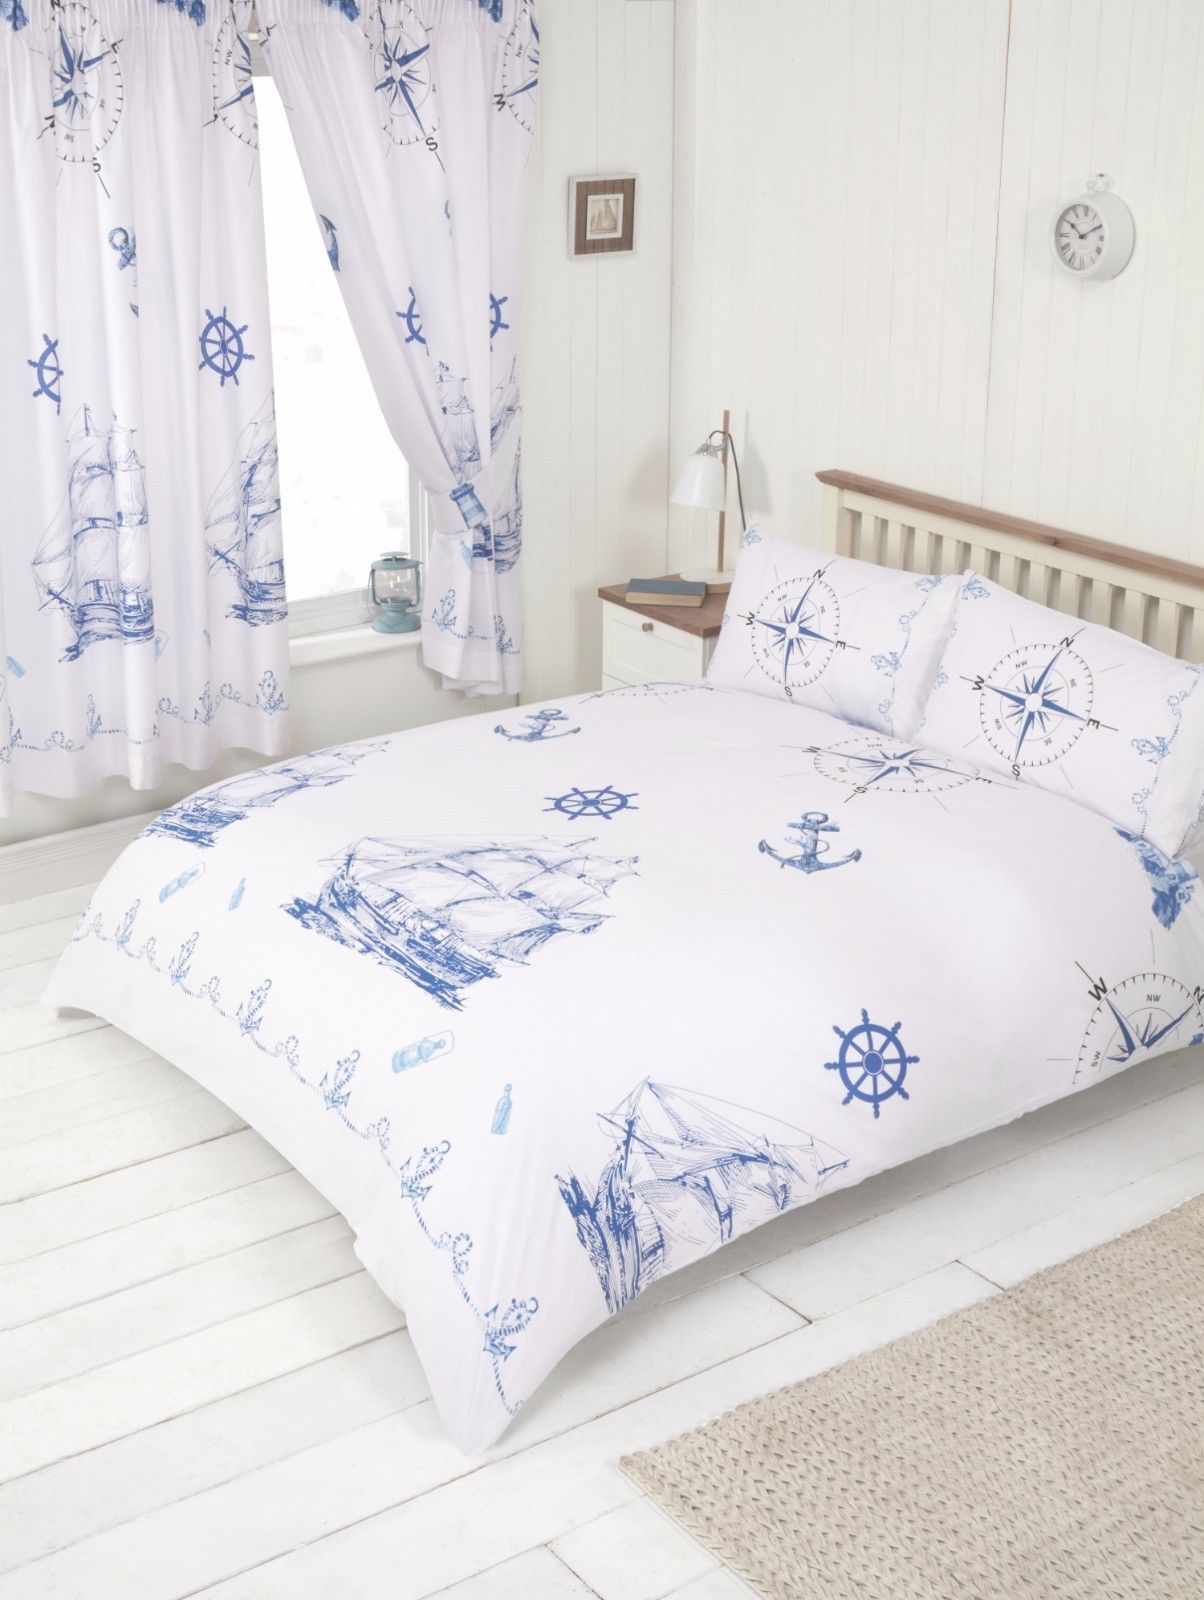 King Size Duvet Cover Set Nautical Ship Boat Anchors Compass Bedding